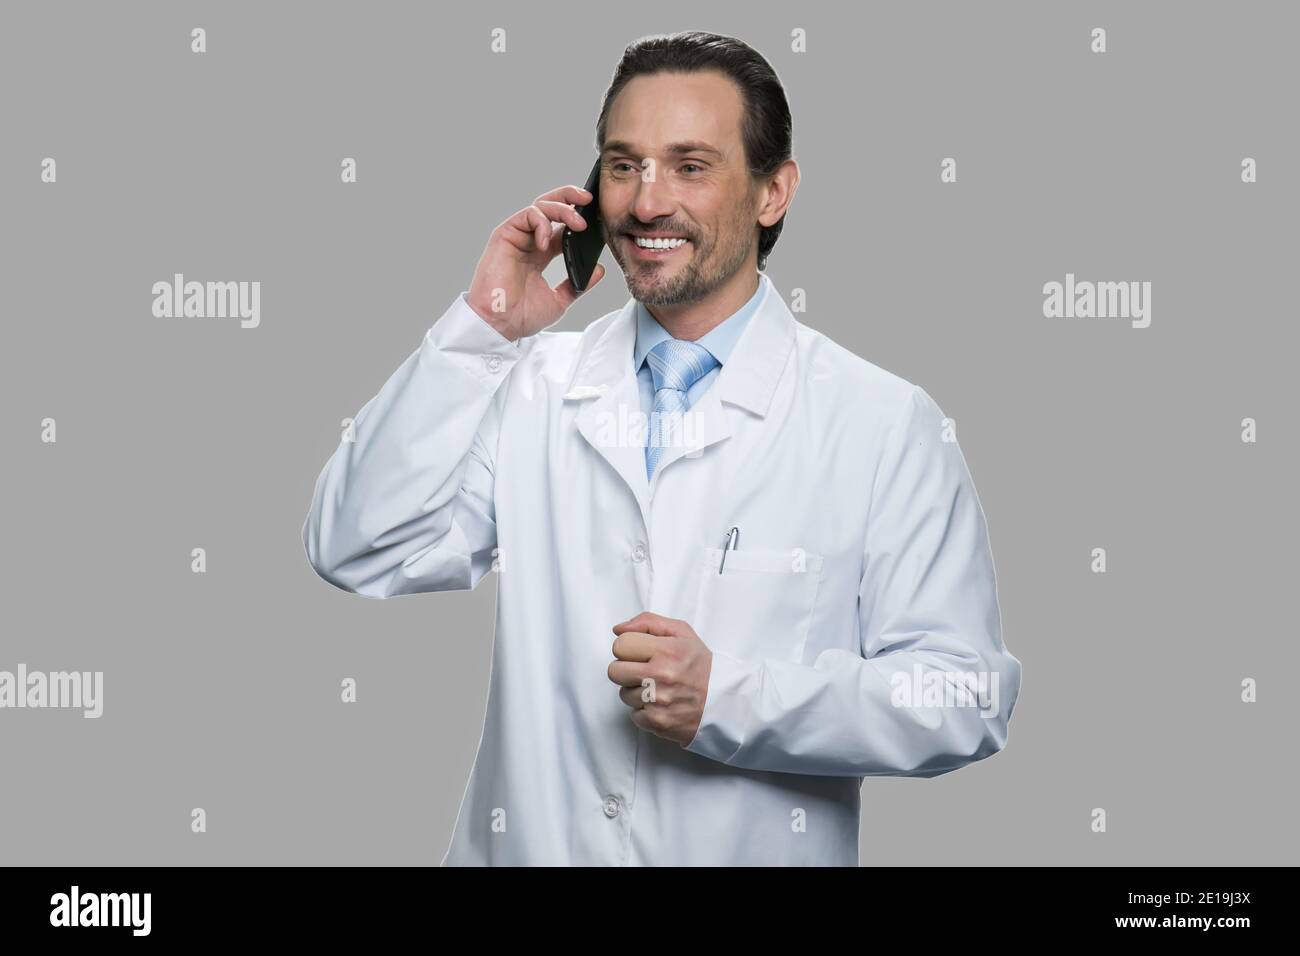 Happy doctor or scientist talking on cell phone. Stock Photo